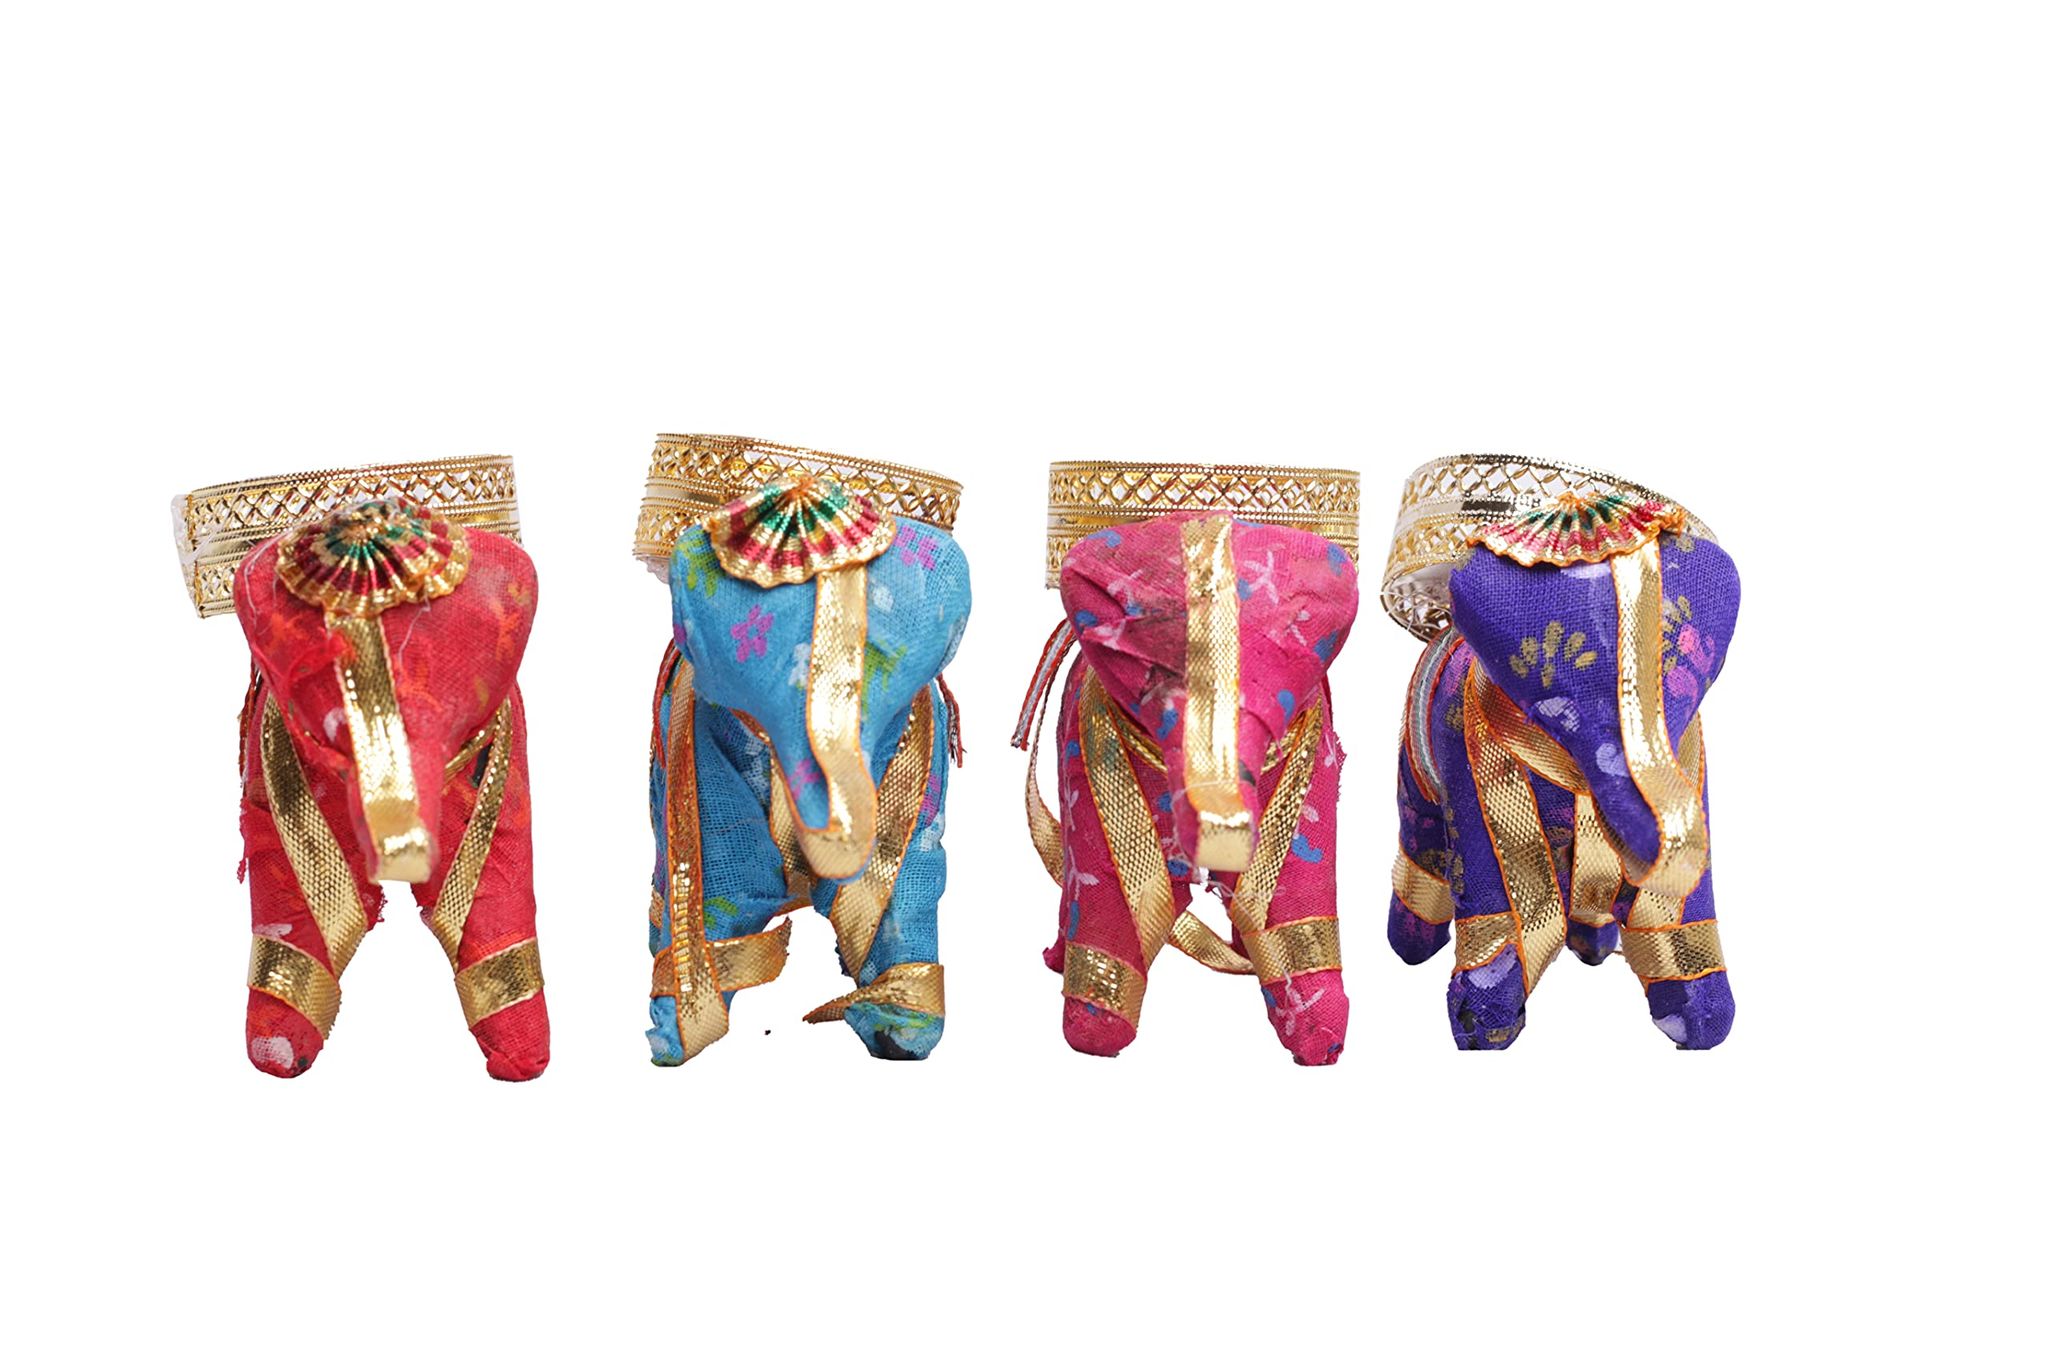 Dbeautify Elephant Stand with Wax Tea Light Candles, Set of 4 Elephants and tealight Candles, Unscented (Traditional)